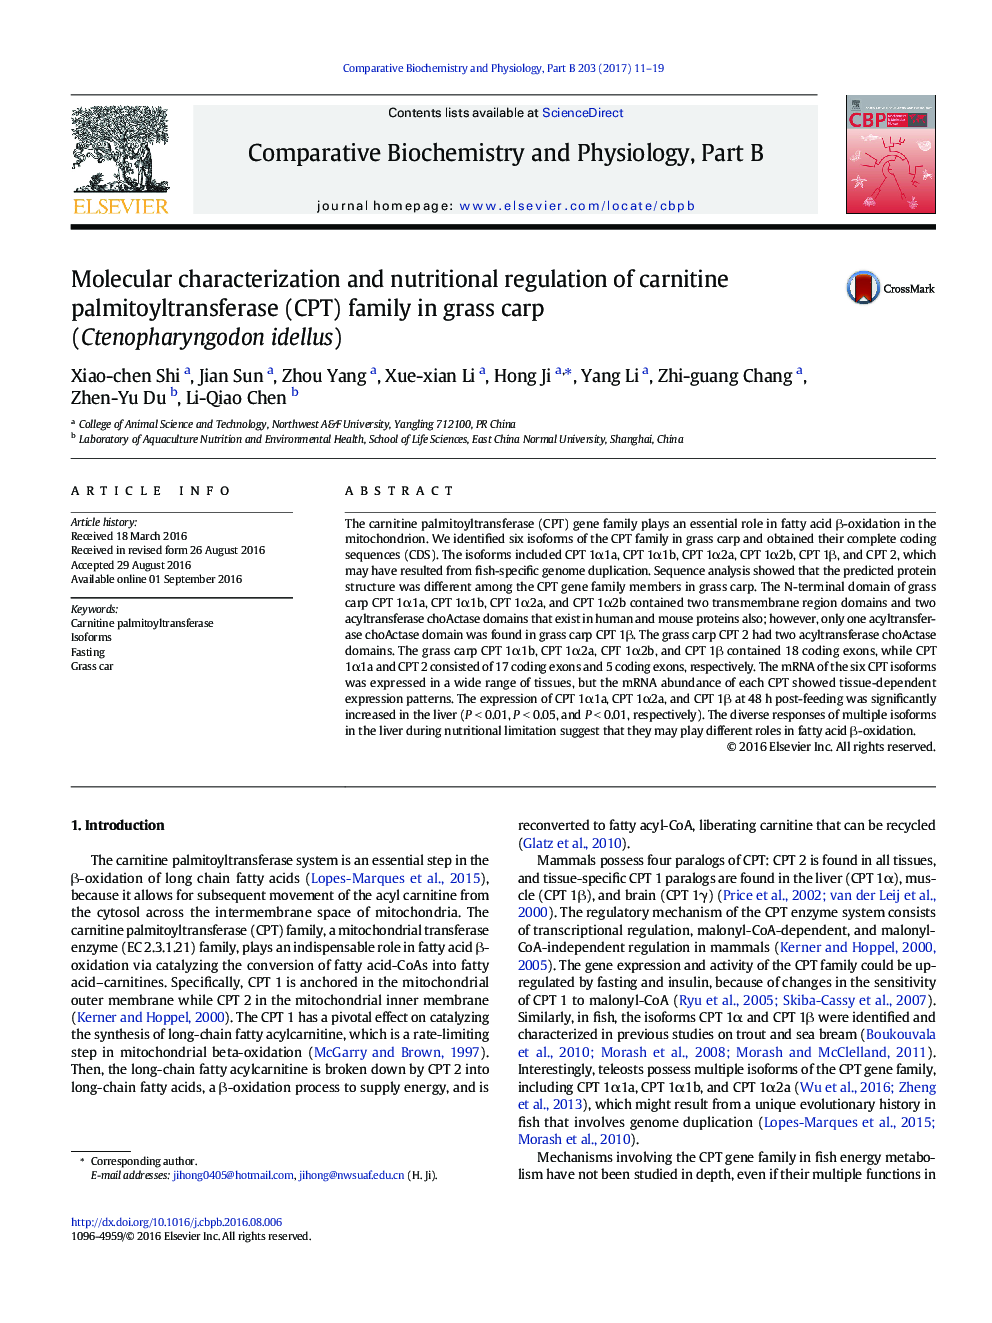 Molecular characterization and nutritional regulation of carnitine palmitoyltransferase (CPT) family in grass carp (Ctenopharyngodon idellus)